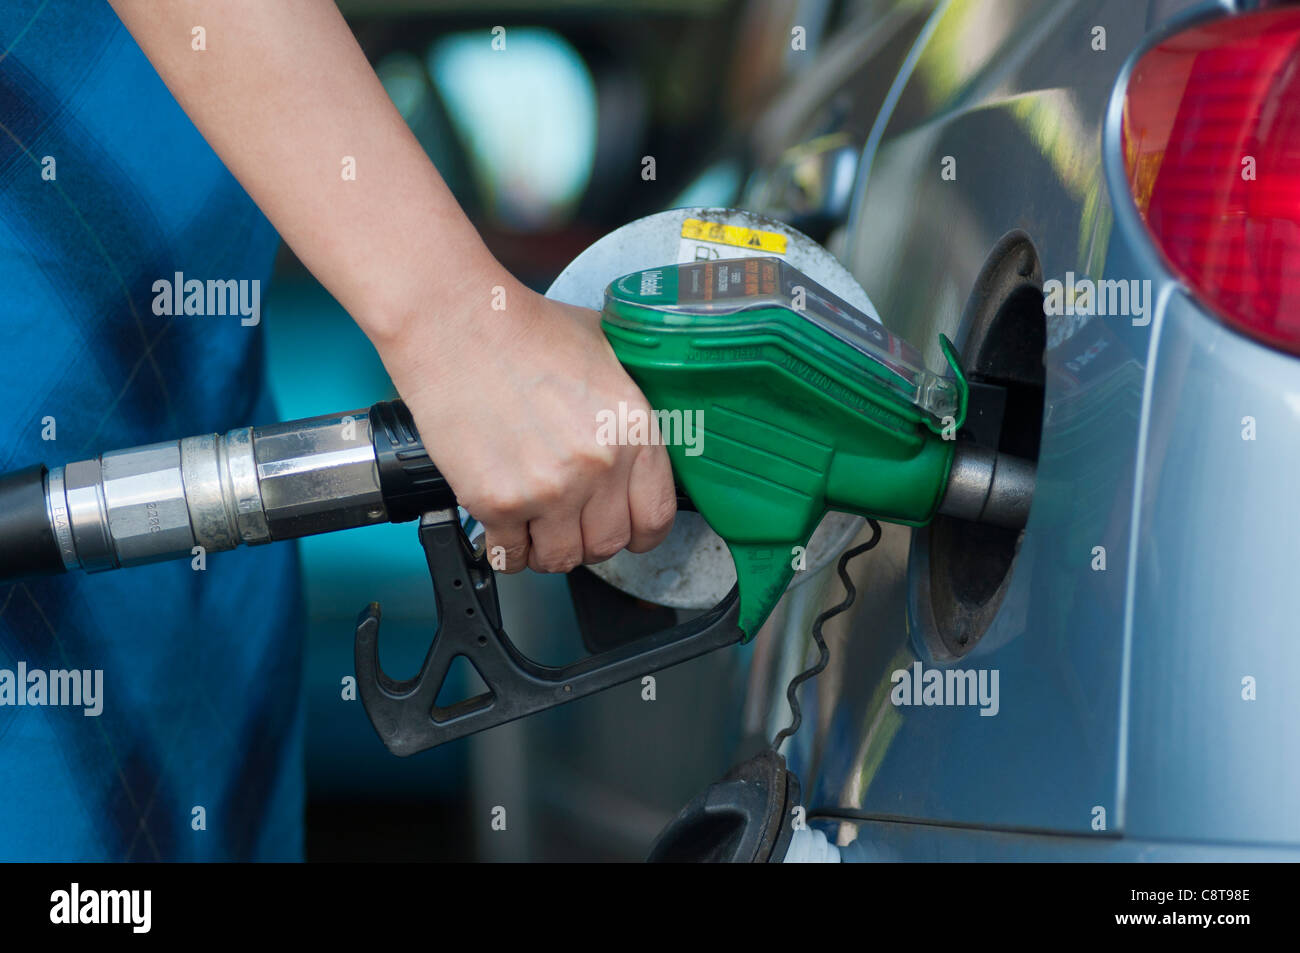 Woman filling up a car with petrol. UK Stock Photo